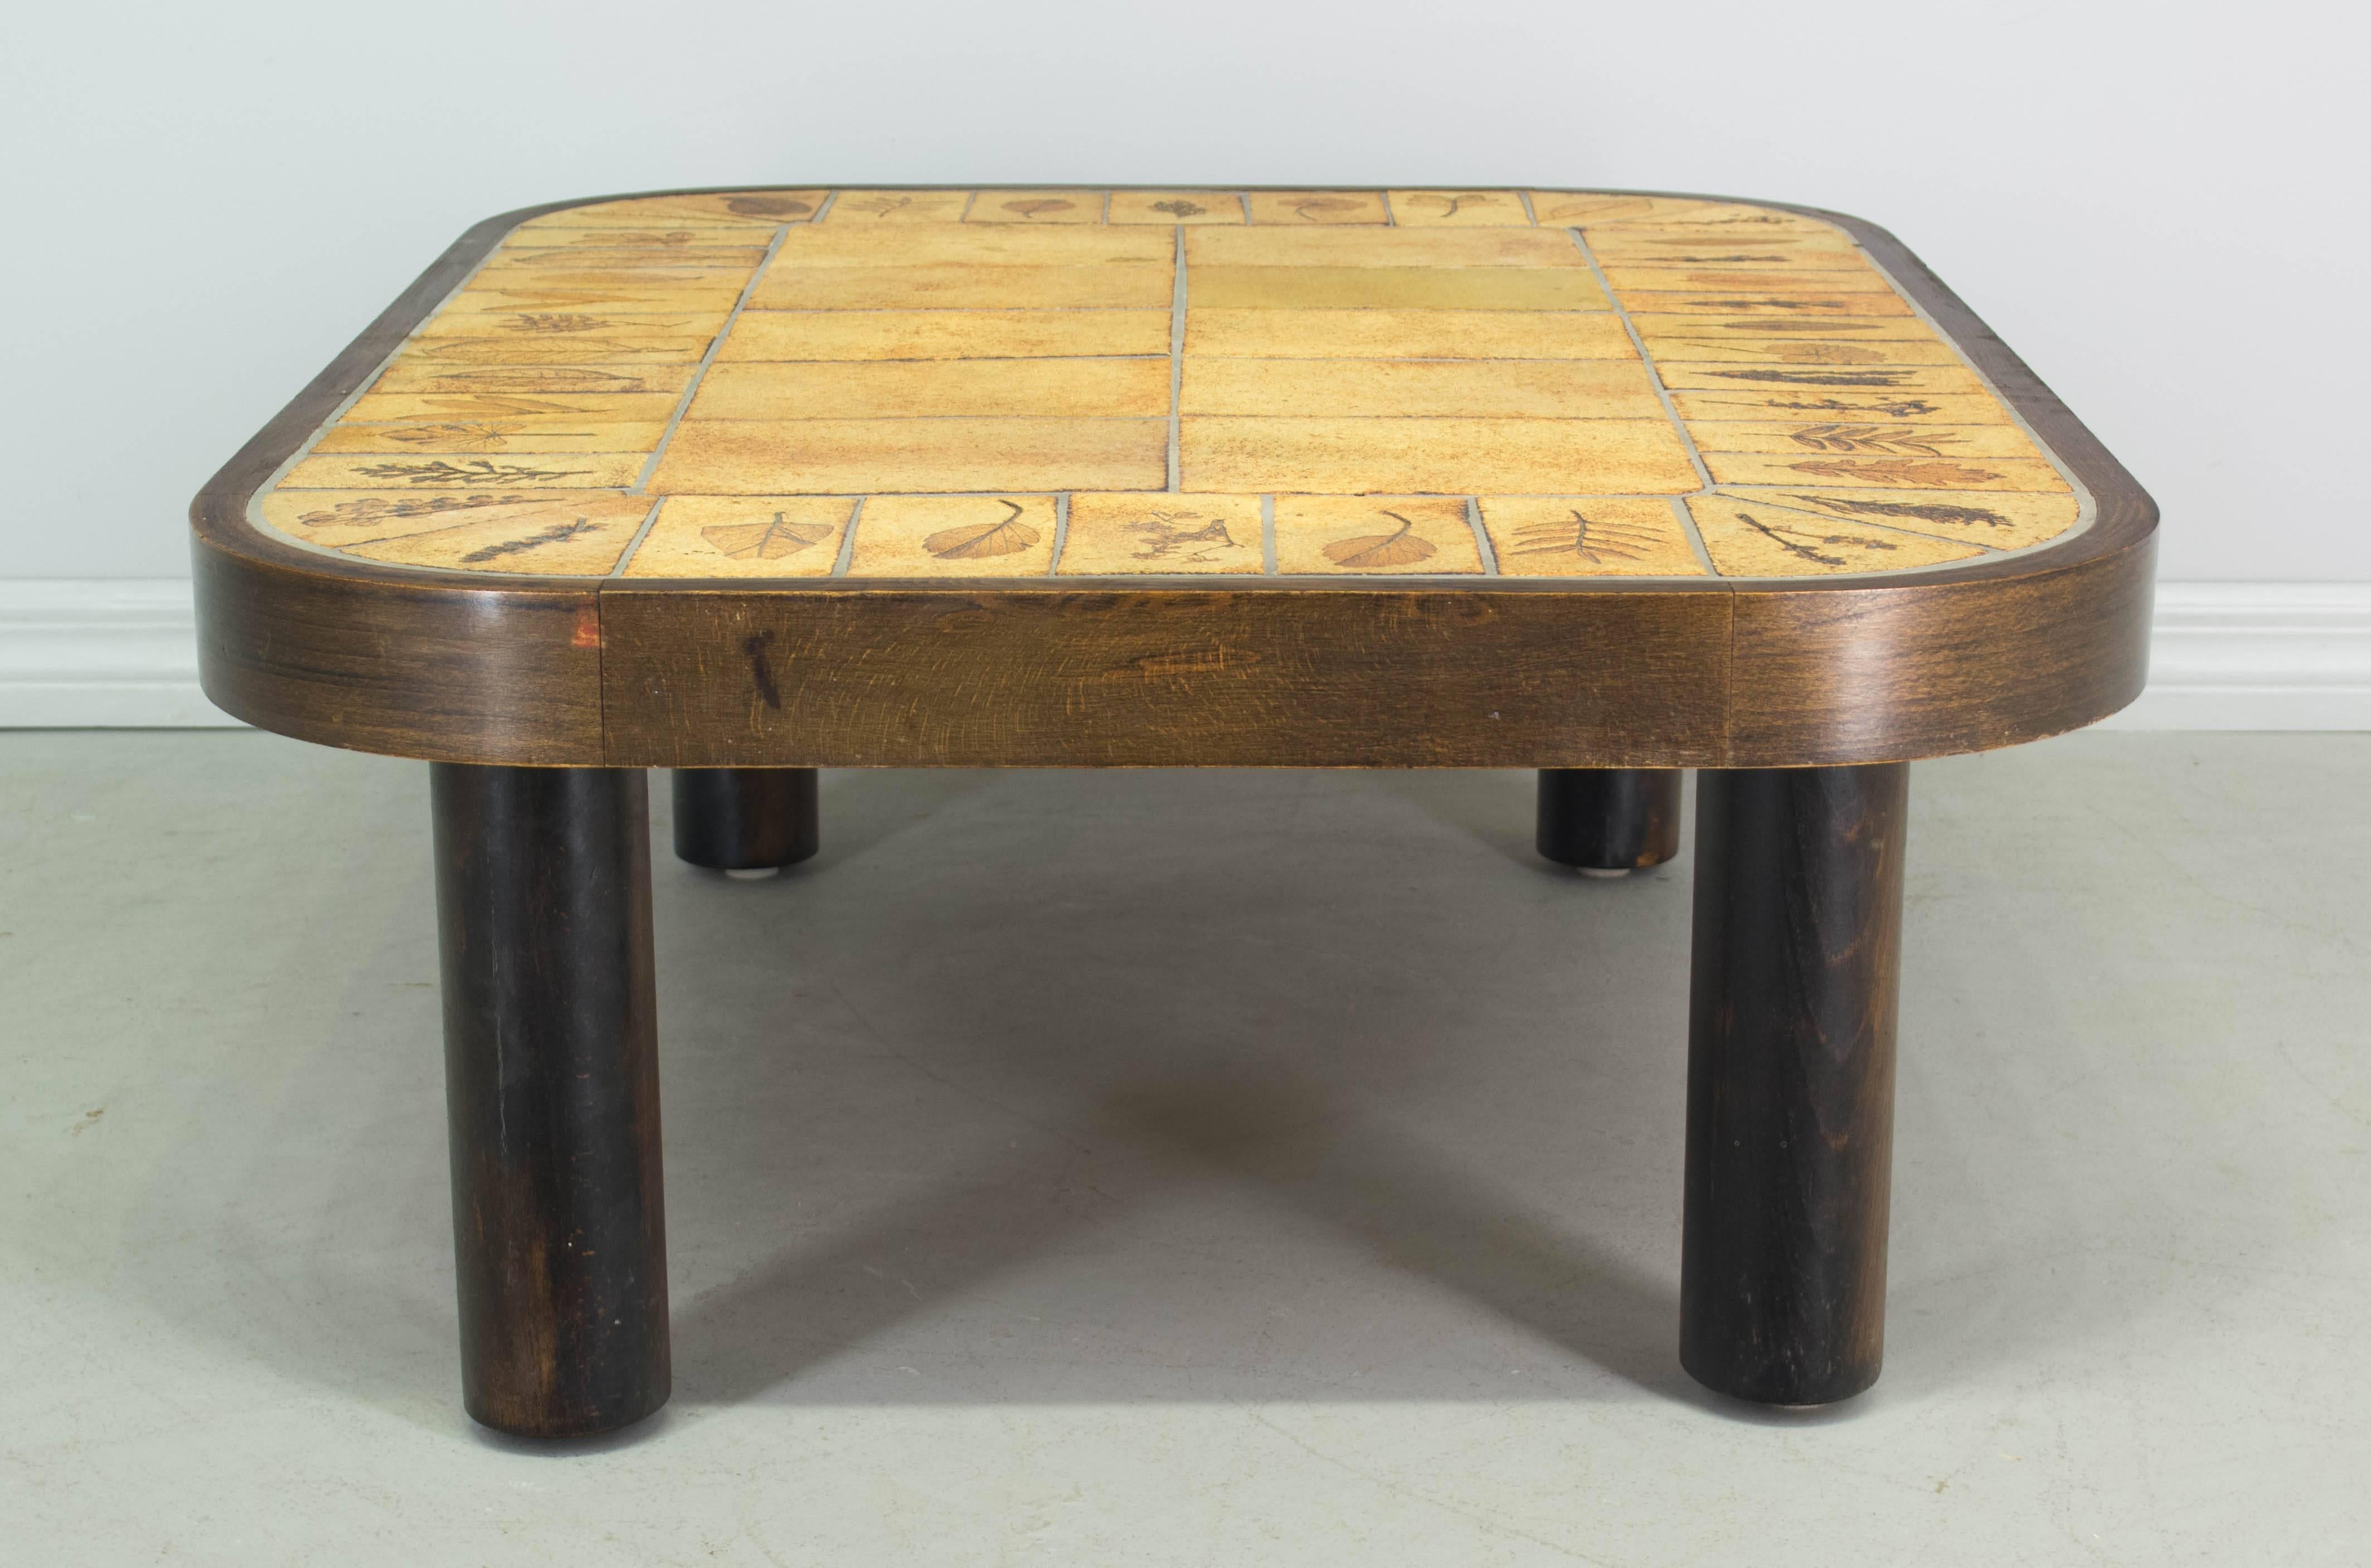 Midcentury French glazed ceramic tile top coffee table designed by Roger Capron. Fossil-like pressed leaves in the surface of the tiles that rim the perimeter. Rectangular wood base with curved corners and thick cylinder legs. Signed: R. Capron As